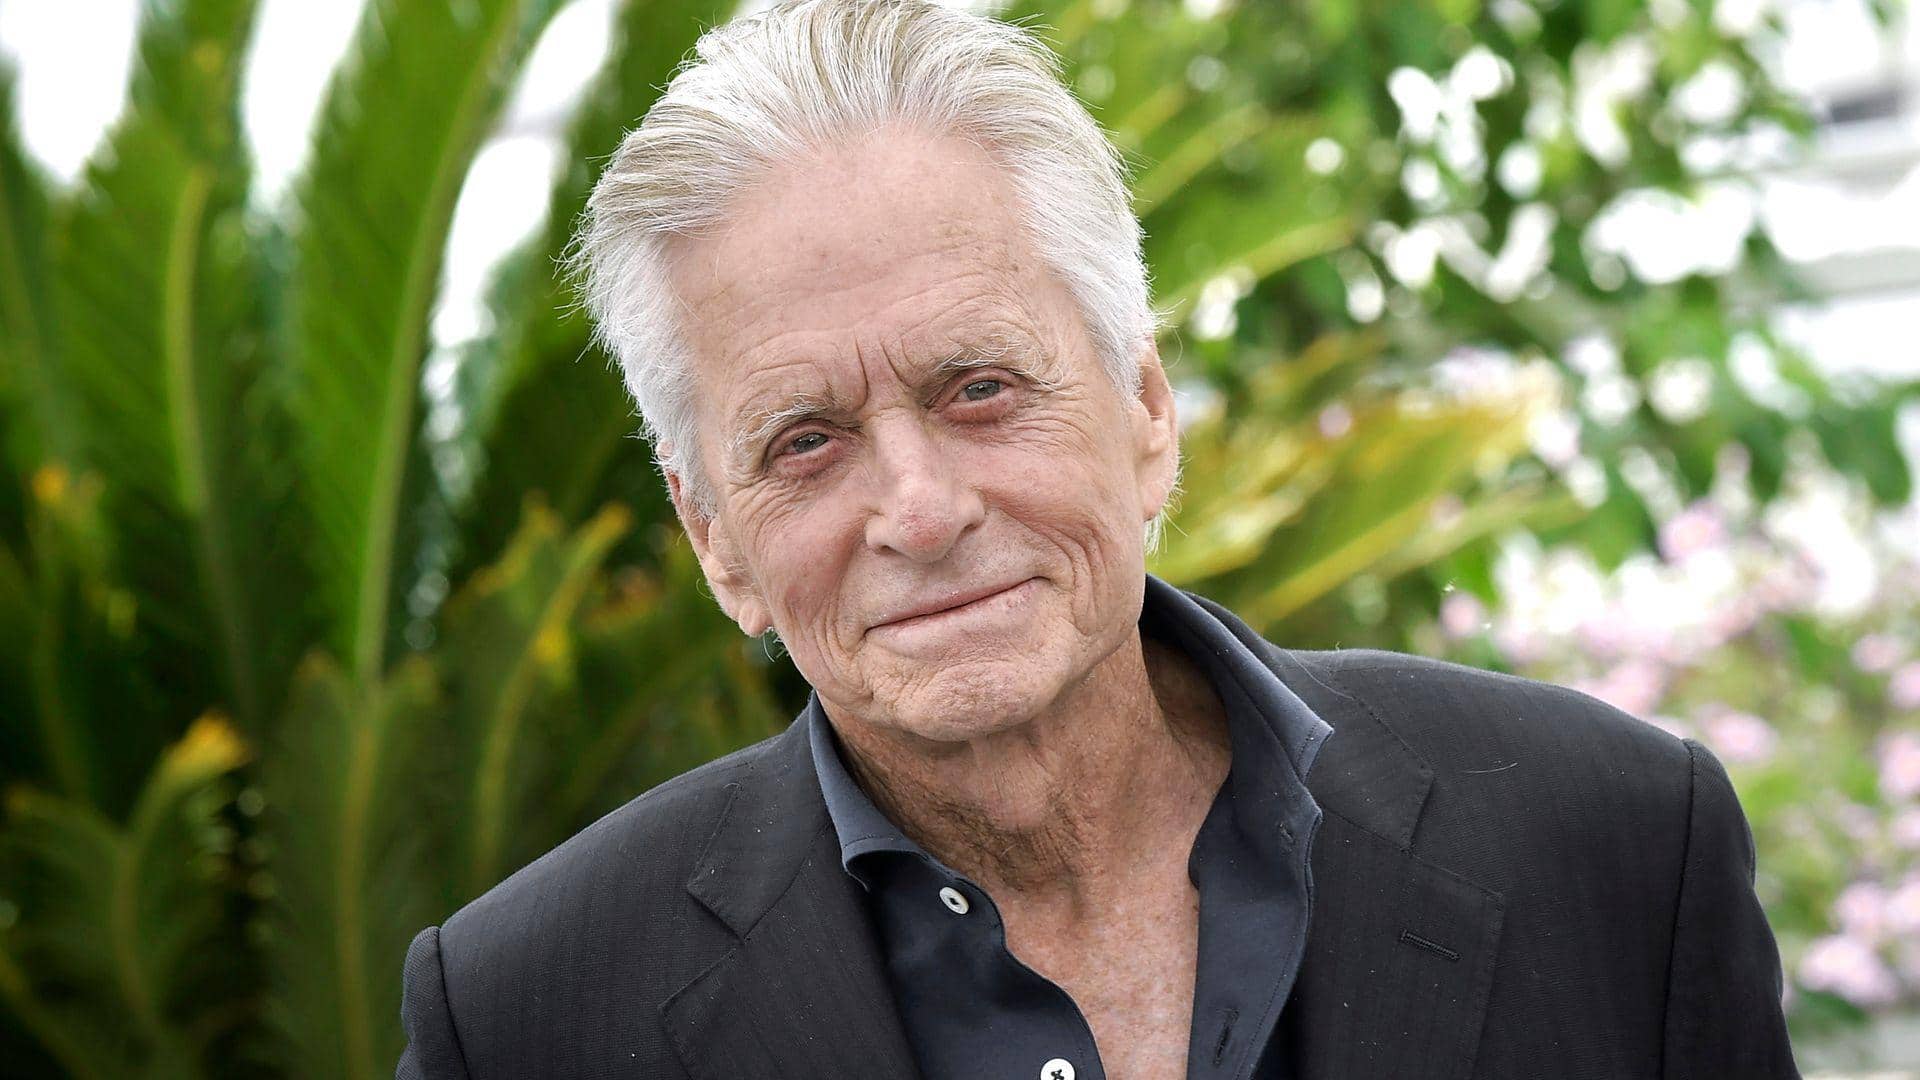 Here's why Michael Douglas compares sex scenes to fight sequences